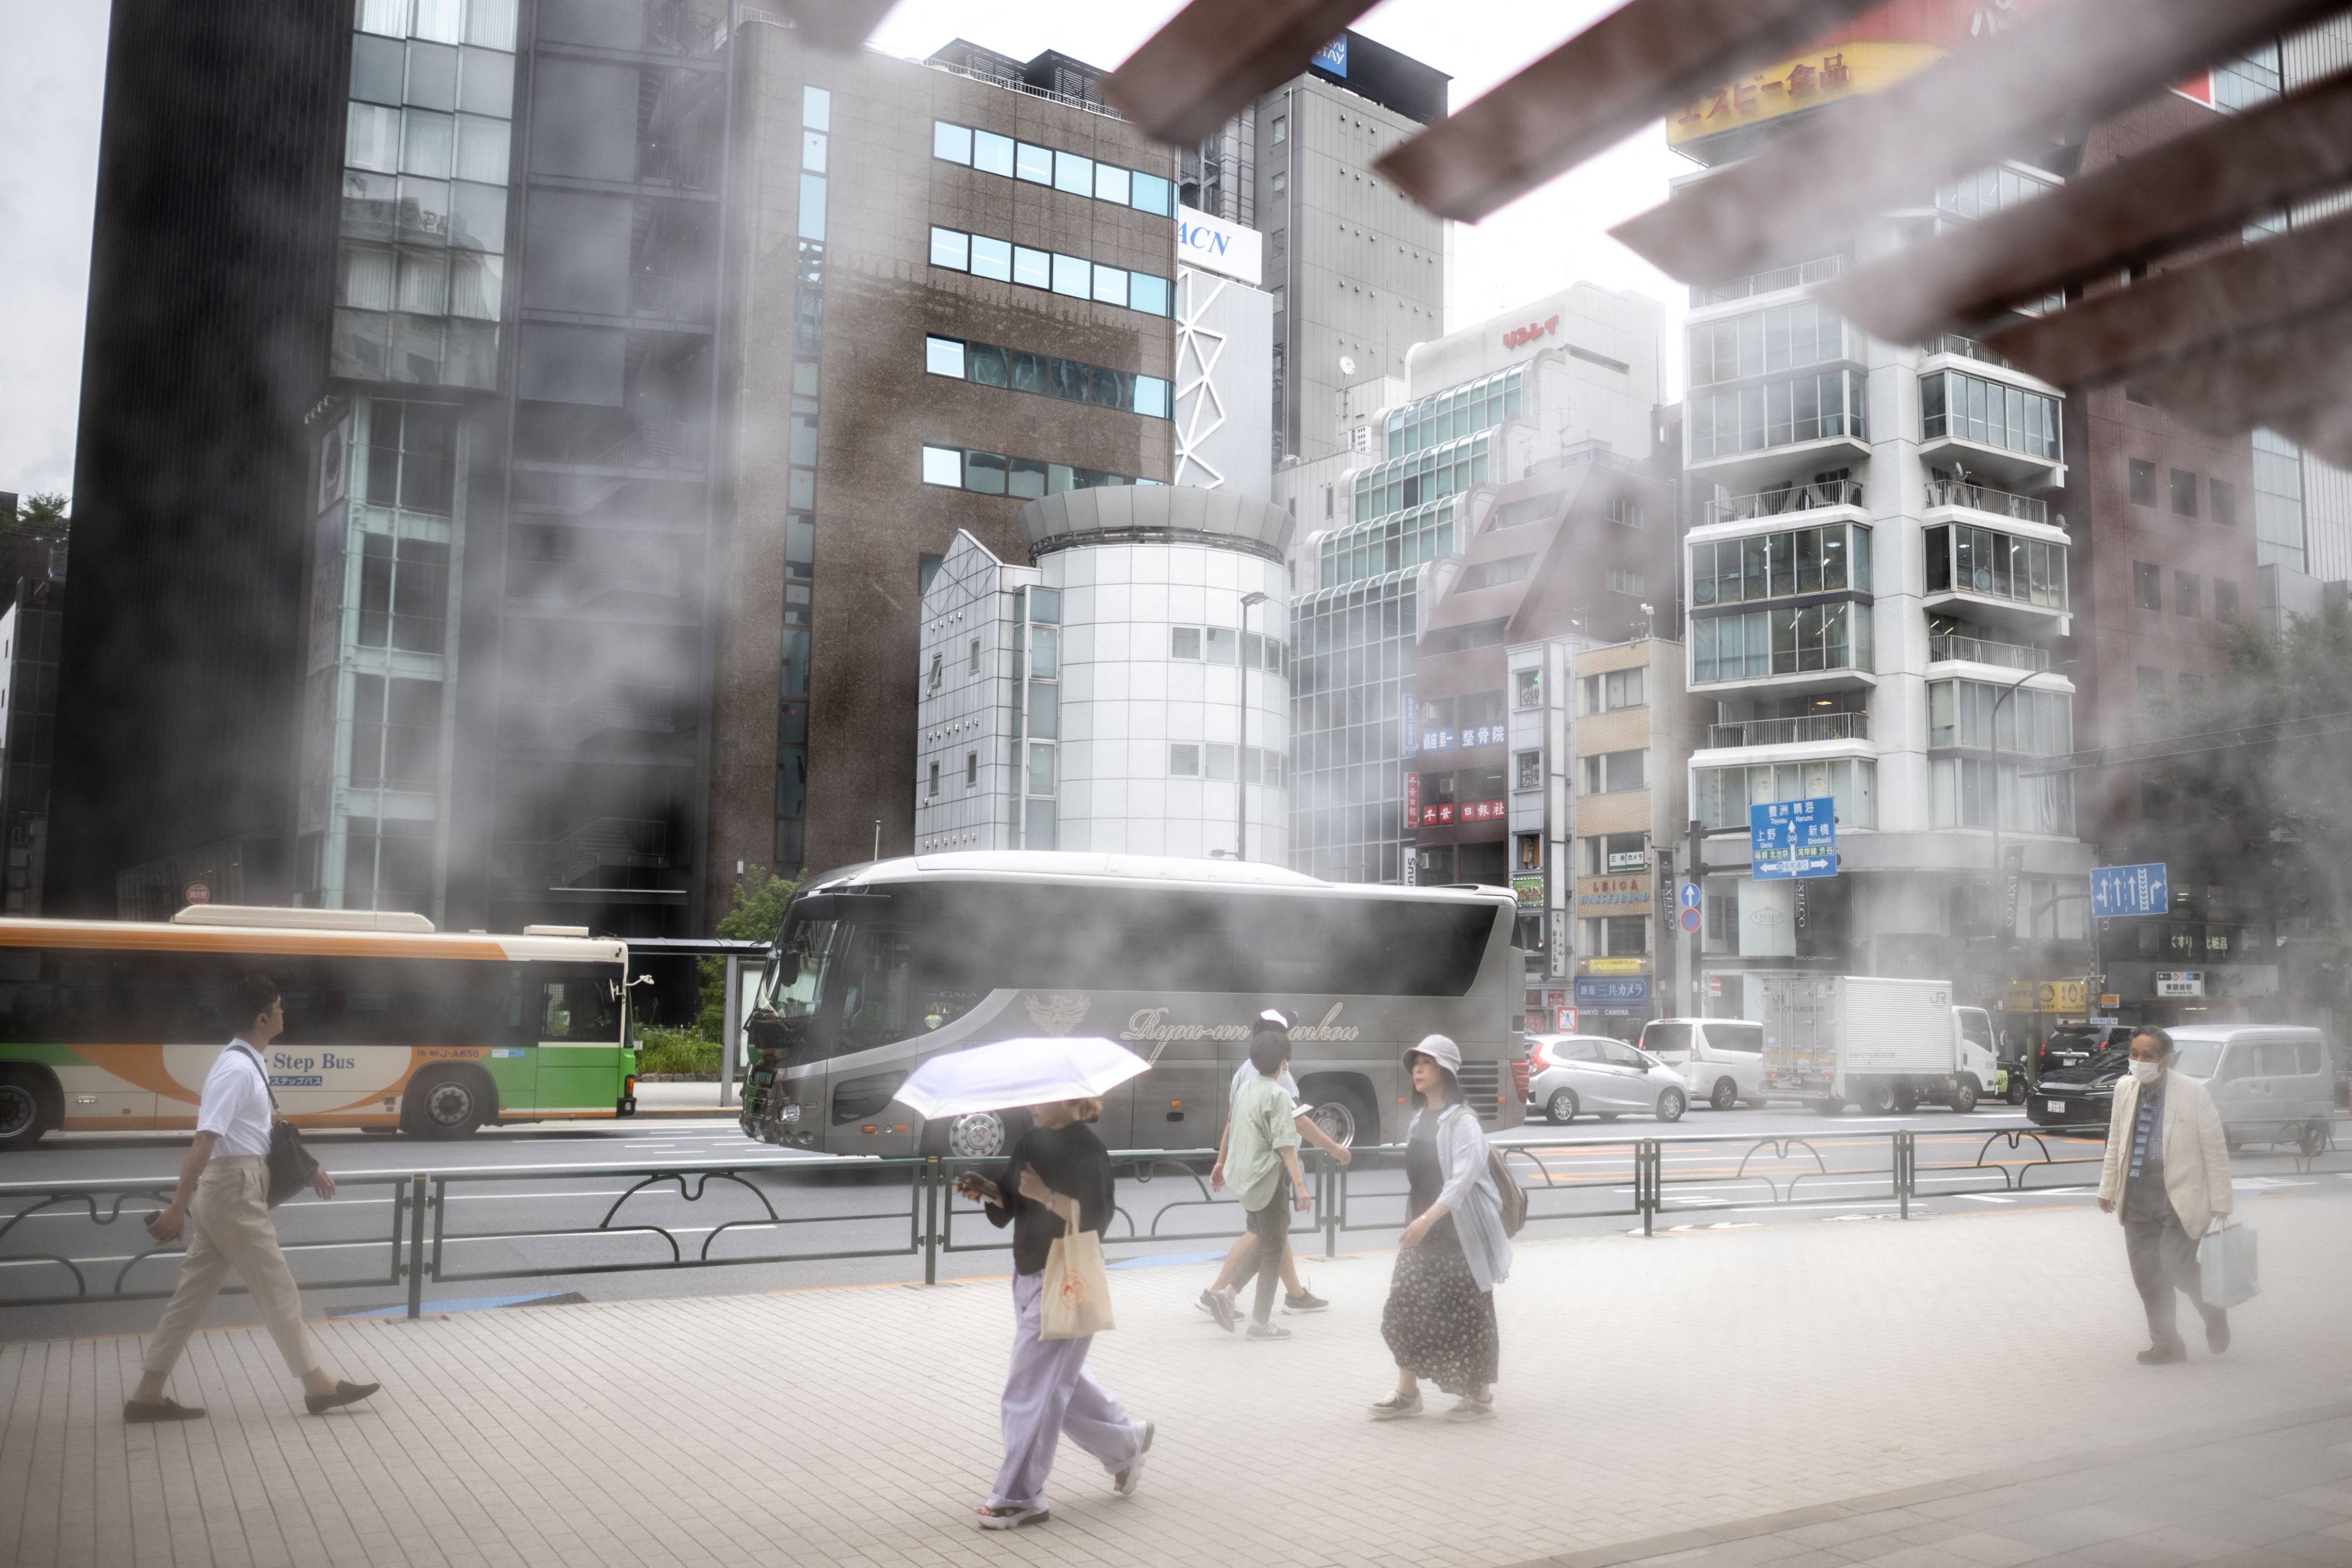 People walk in front of an overhead water misting system on a hot day in Tokyo’s Ginza district on July 2. Photo: AFP